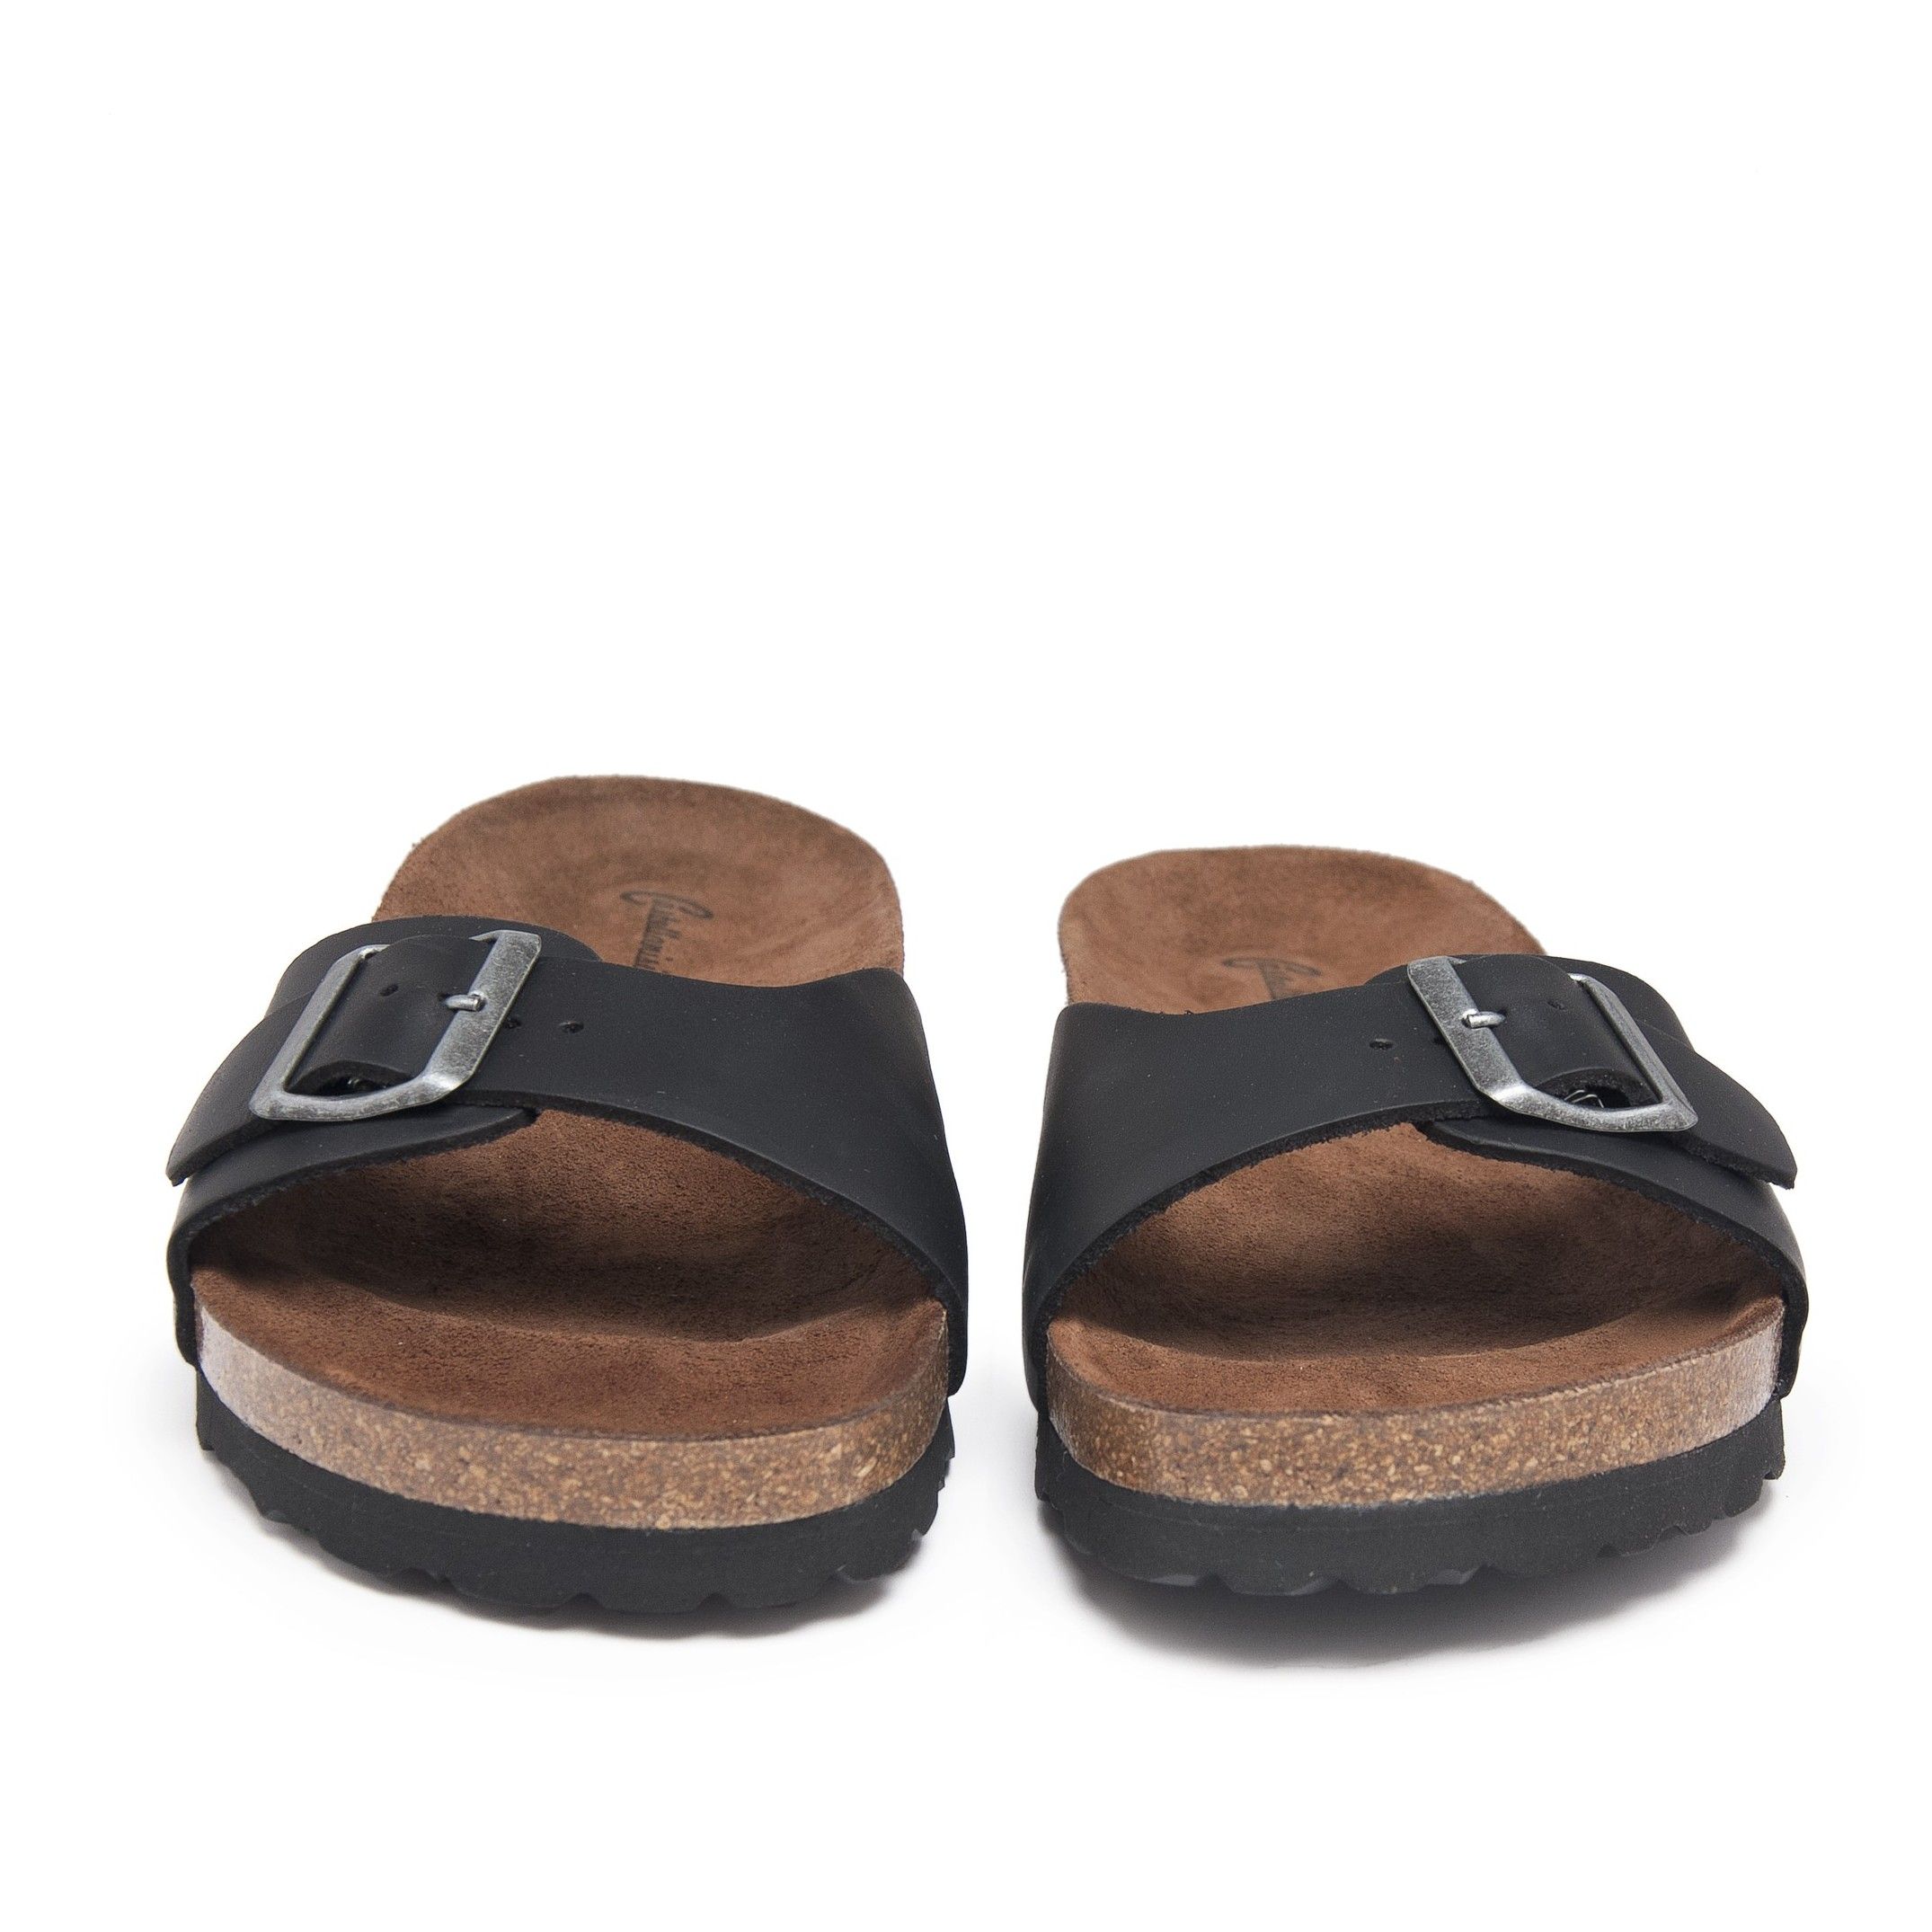 Bio leather sandals with metal buckle. Adjustable metal buckle. Exterior and interior made of leather. Sole: EVA. This product is manufactured in Spain.